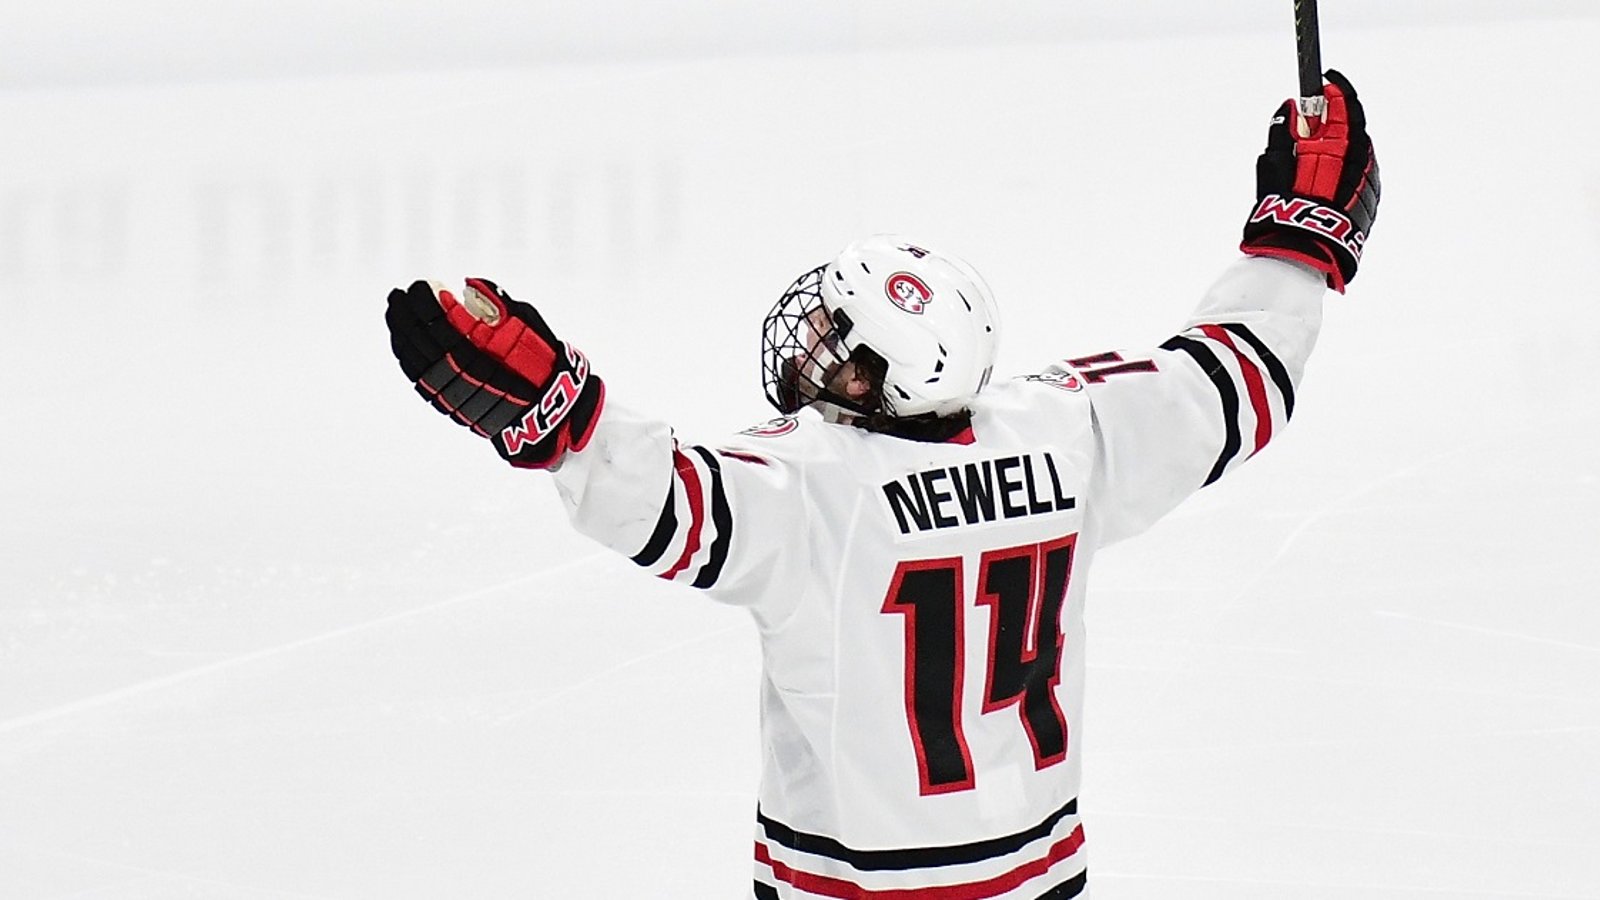 Breaking: Free agent college star Patrick Newell close to signing with NHL team.